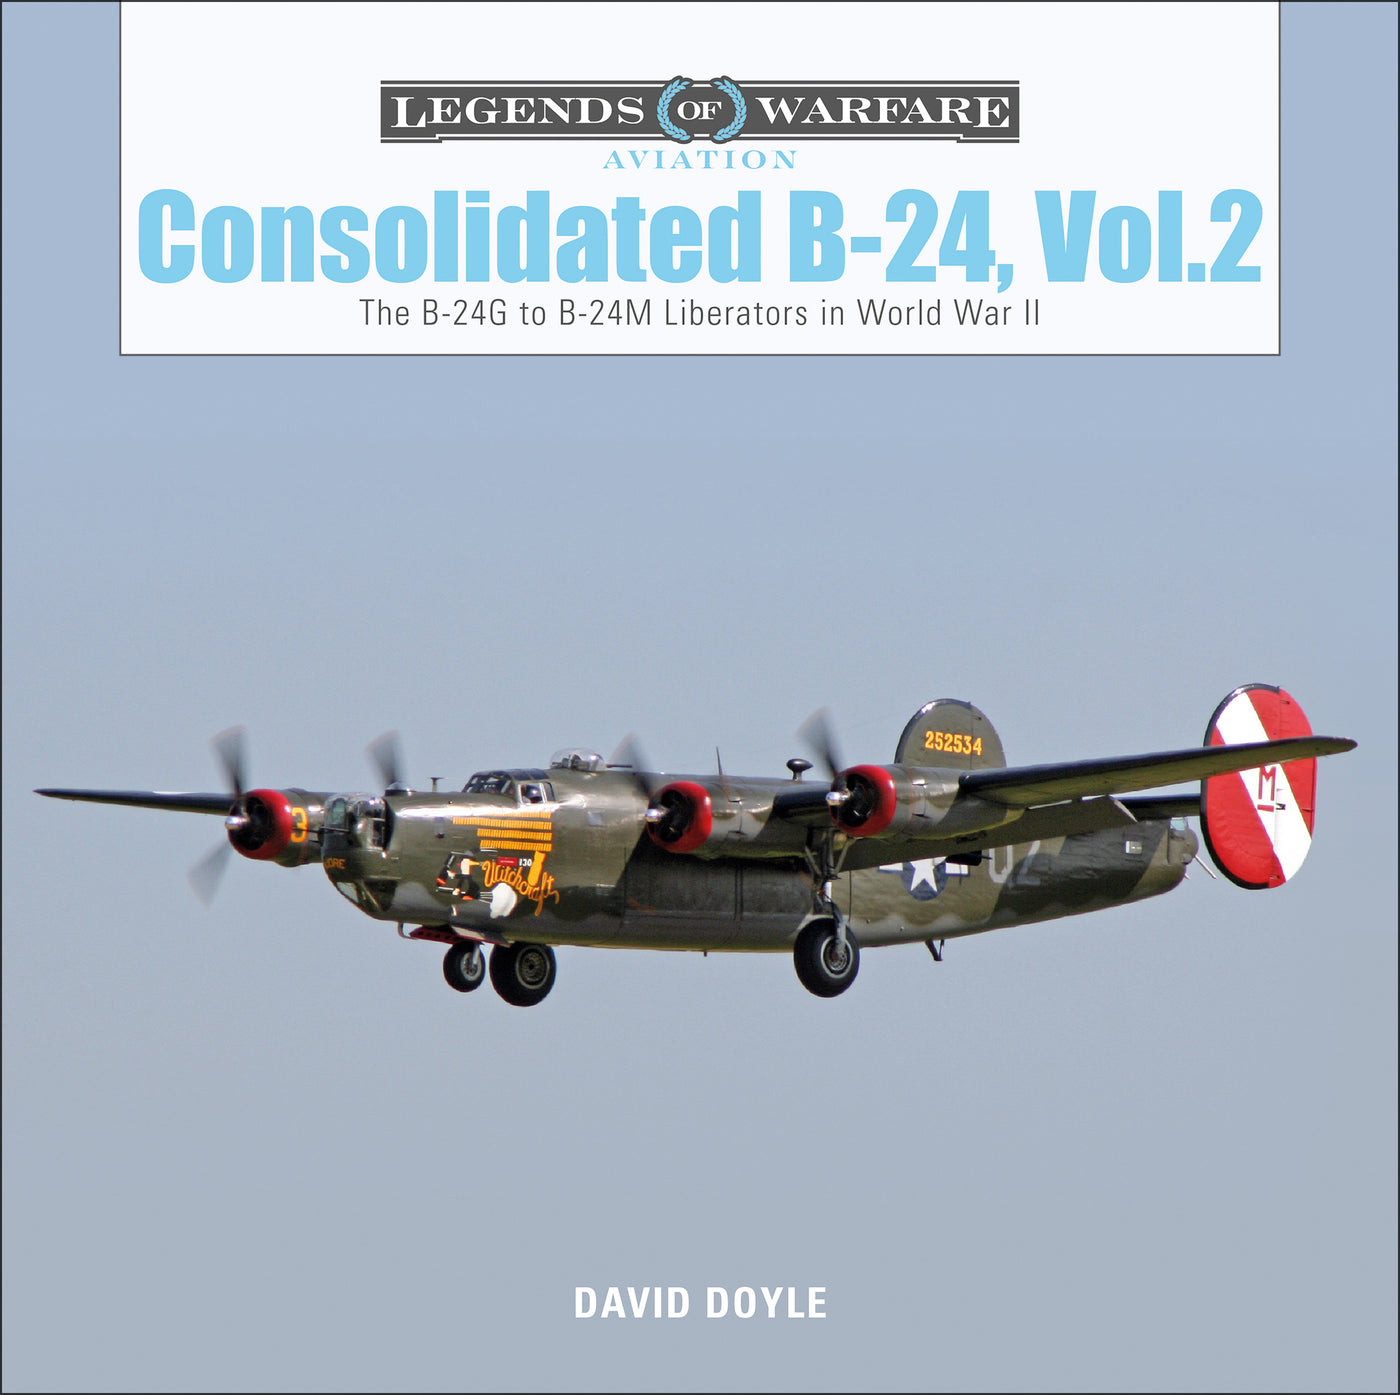 Consolidated B-24 Vol.2